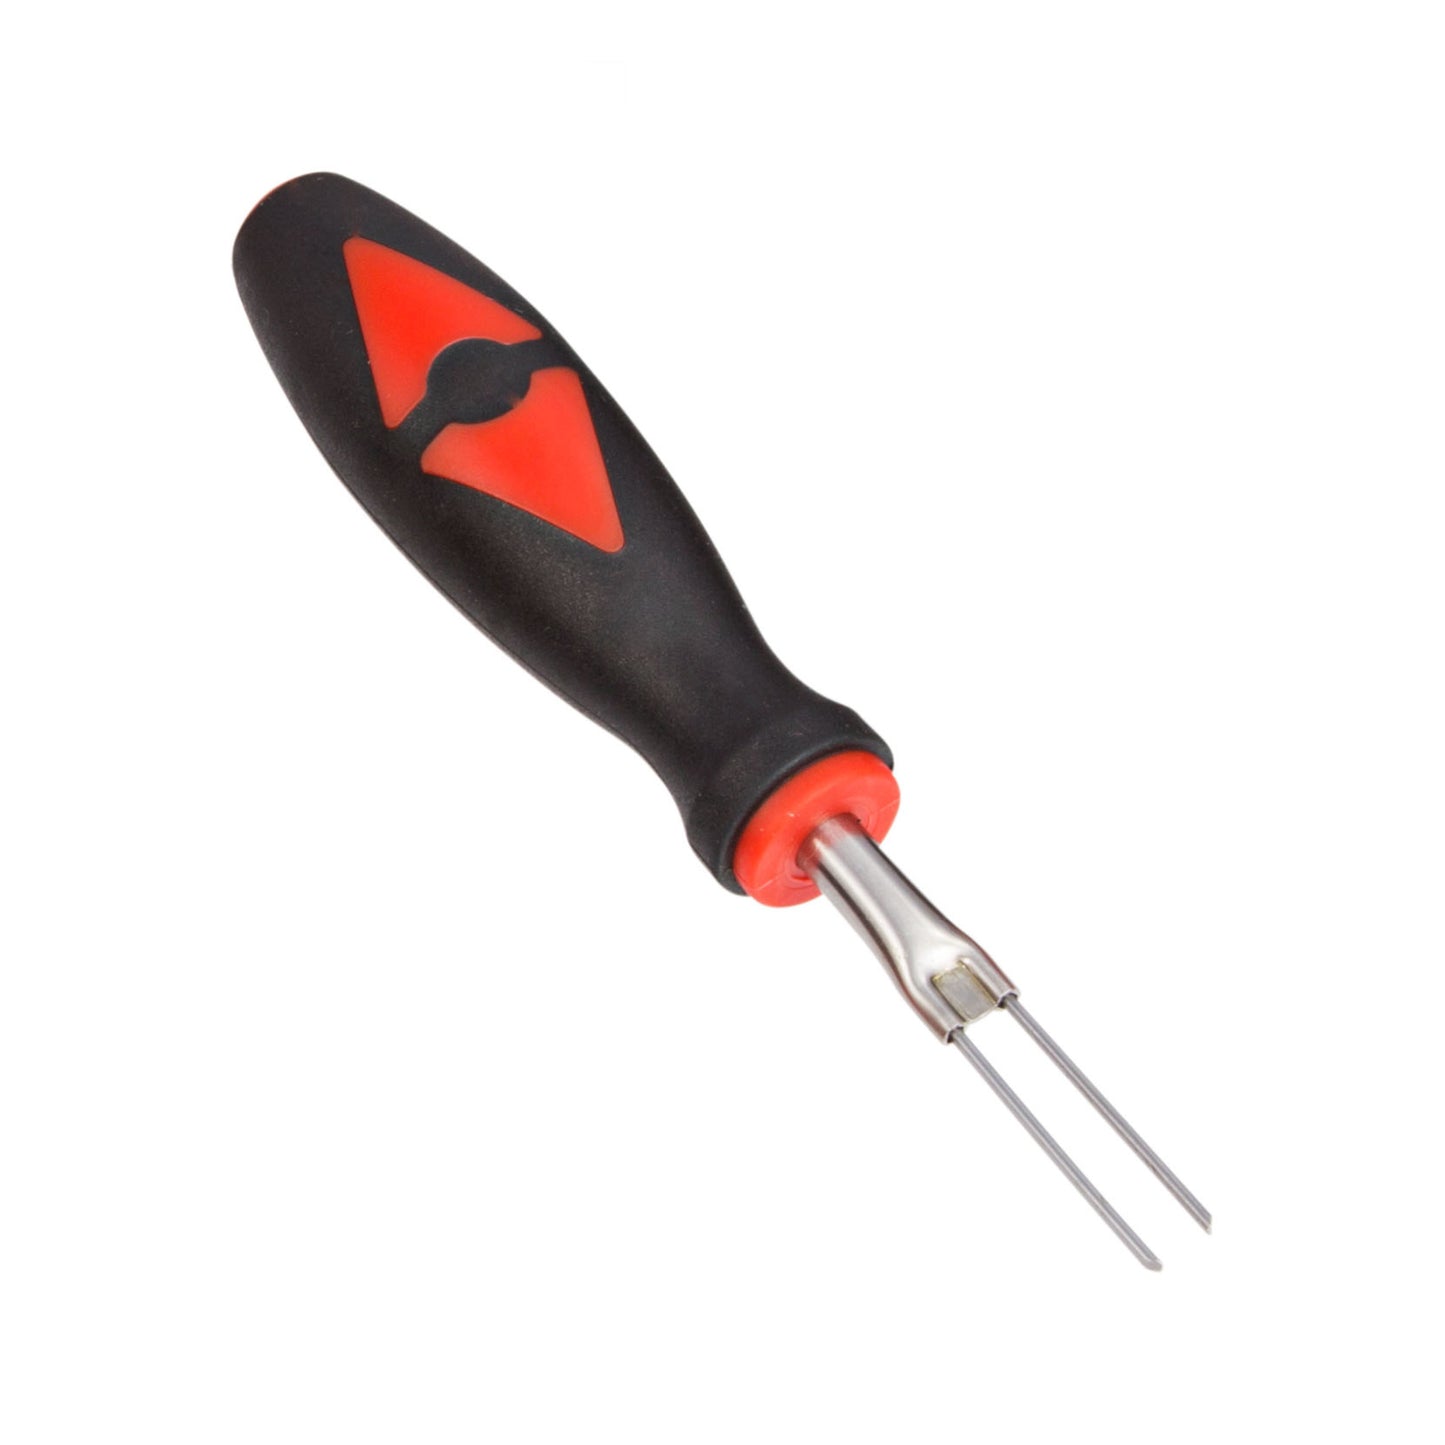 STEELMAN 1.60mm x 20.00mm Flat Twin Blade Automotive Terminal Tool designed to separate wires from their terminal blocks without causing damage to either